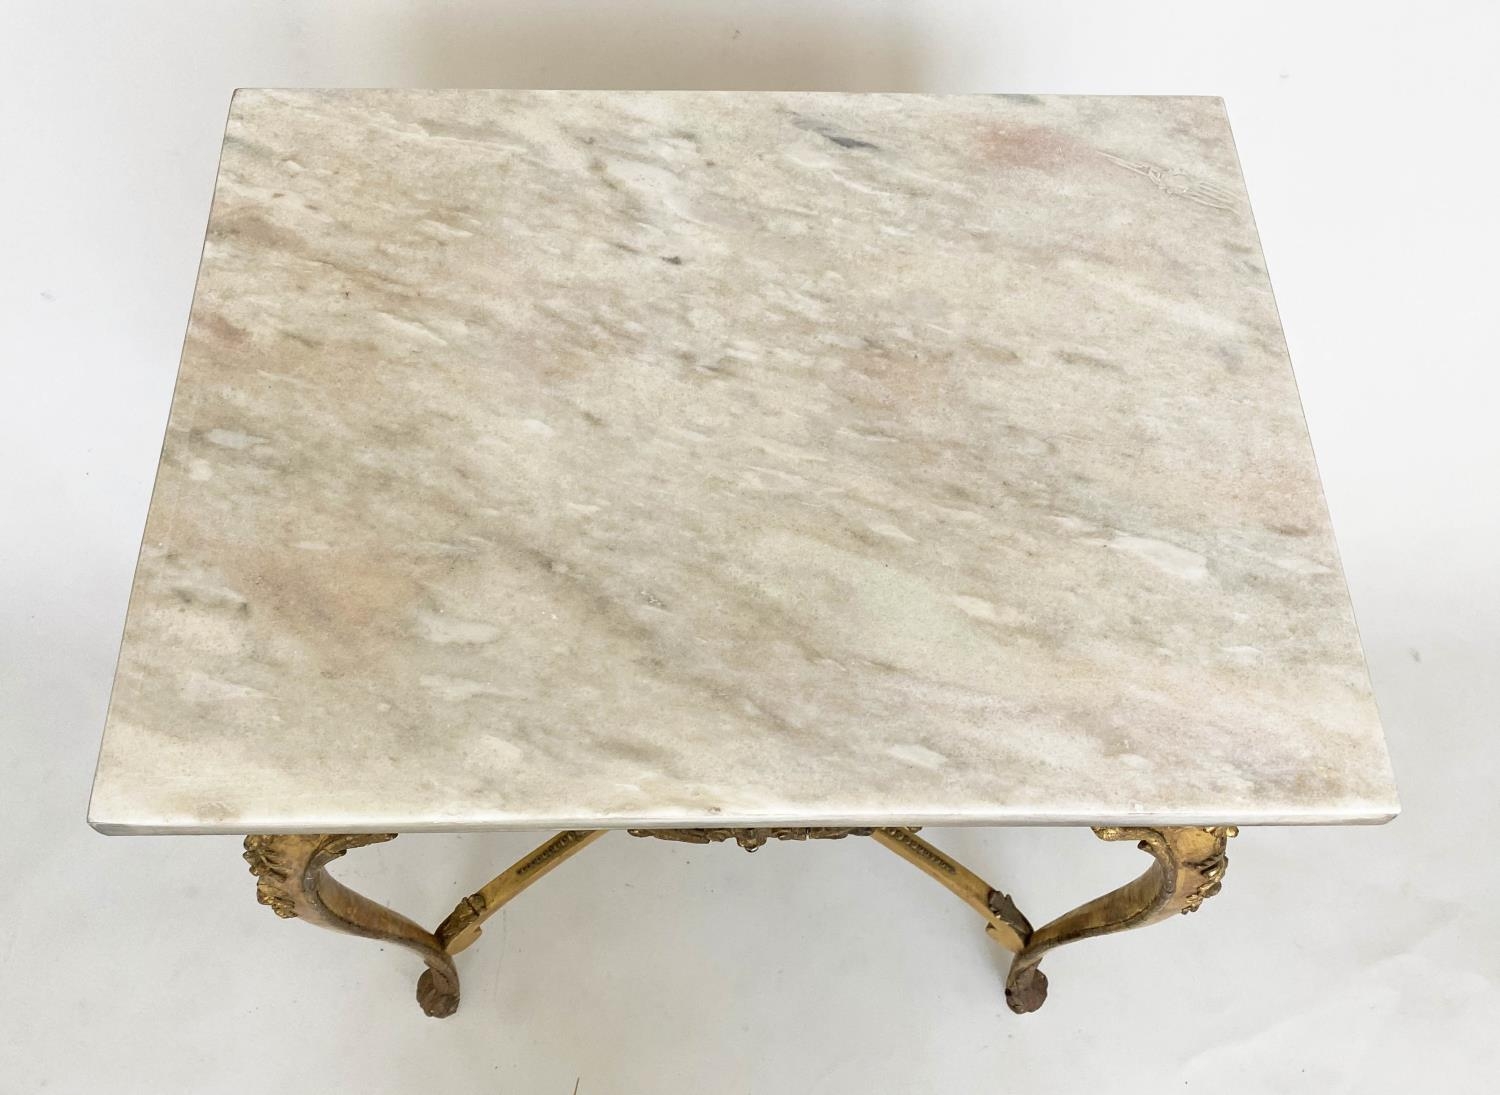 CENTRE TABLE, 19th century Italian giltwood and gesso with shell and C scroll decoration, marble top - Image 3 of 11